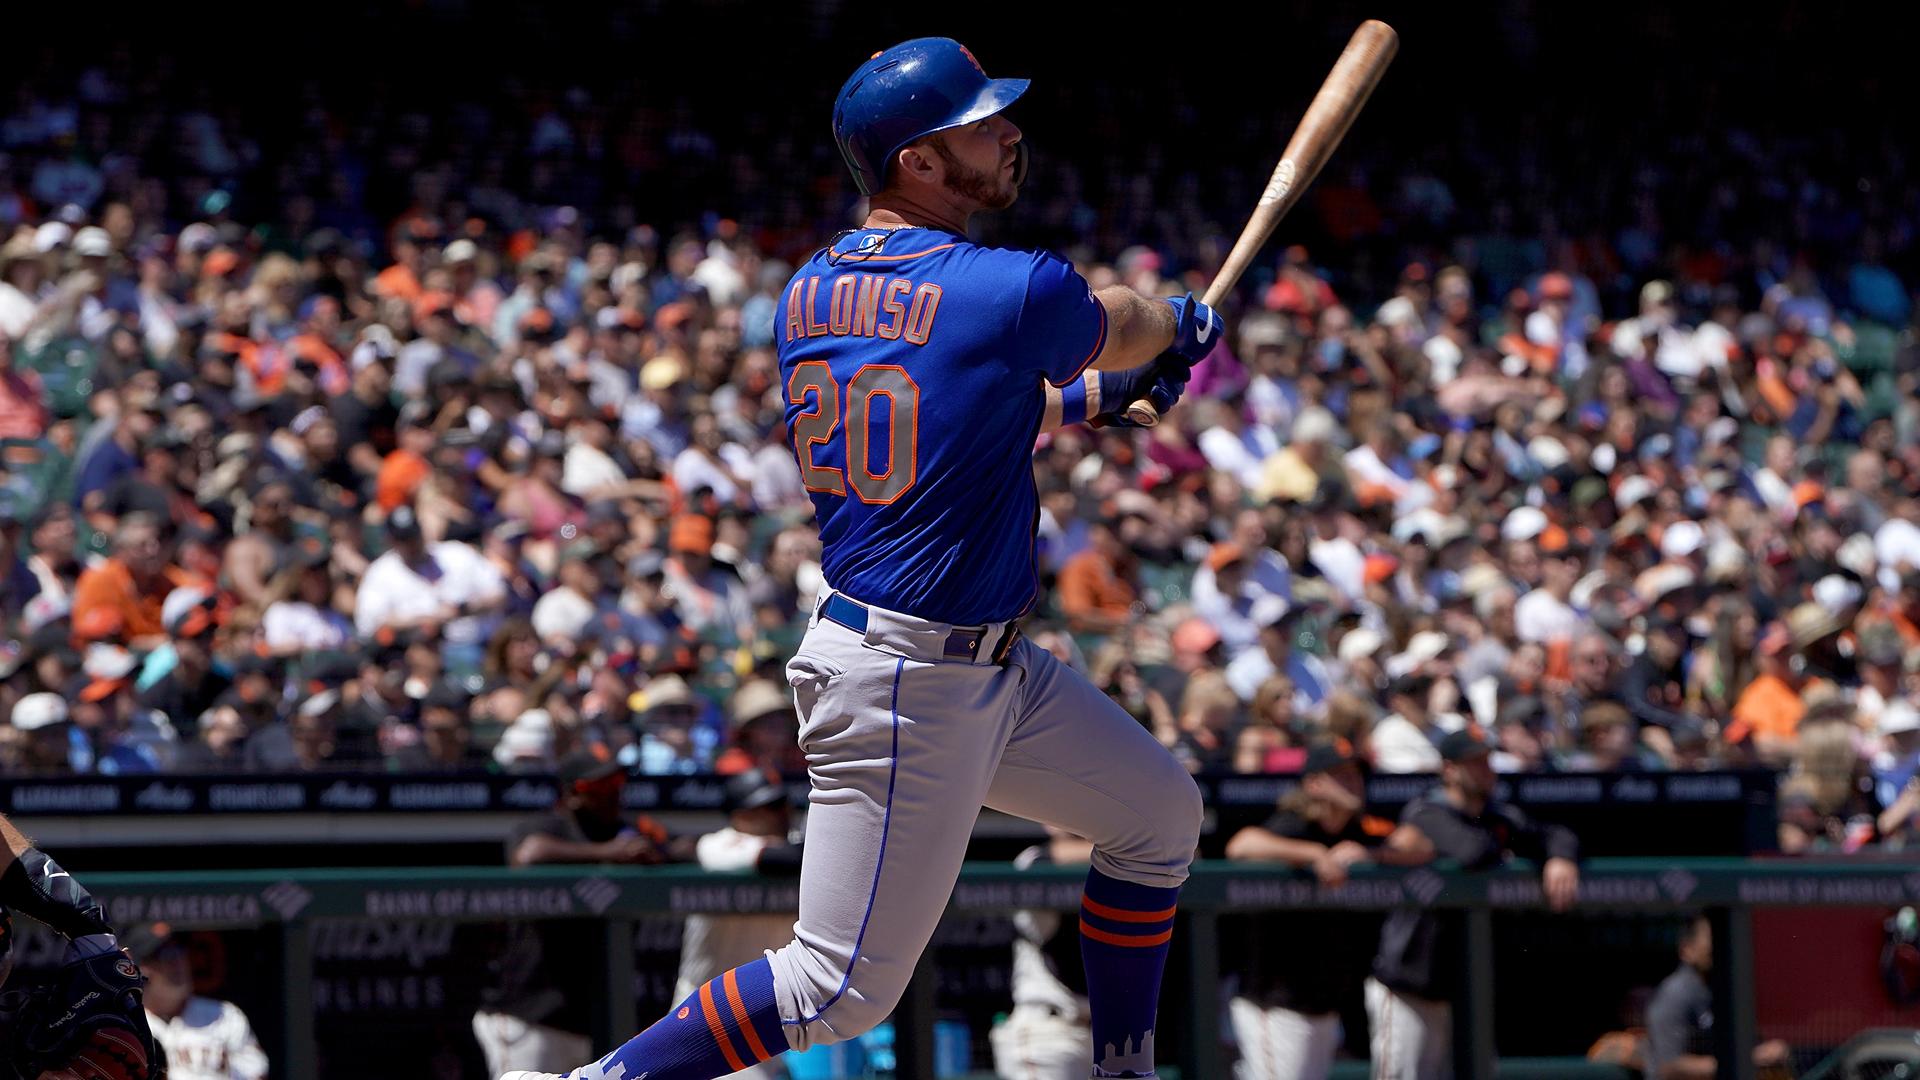 Pete Alonso wallpaper by LGM2053 - Download on ZEDGE™